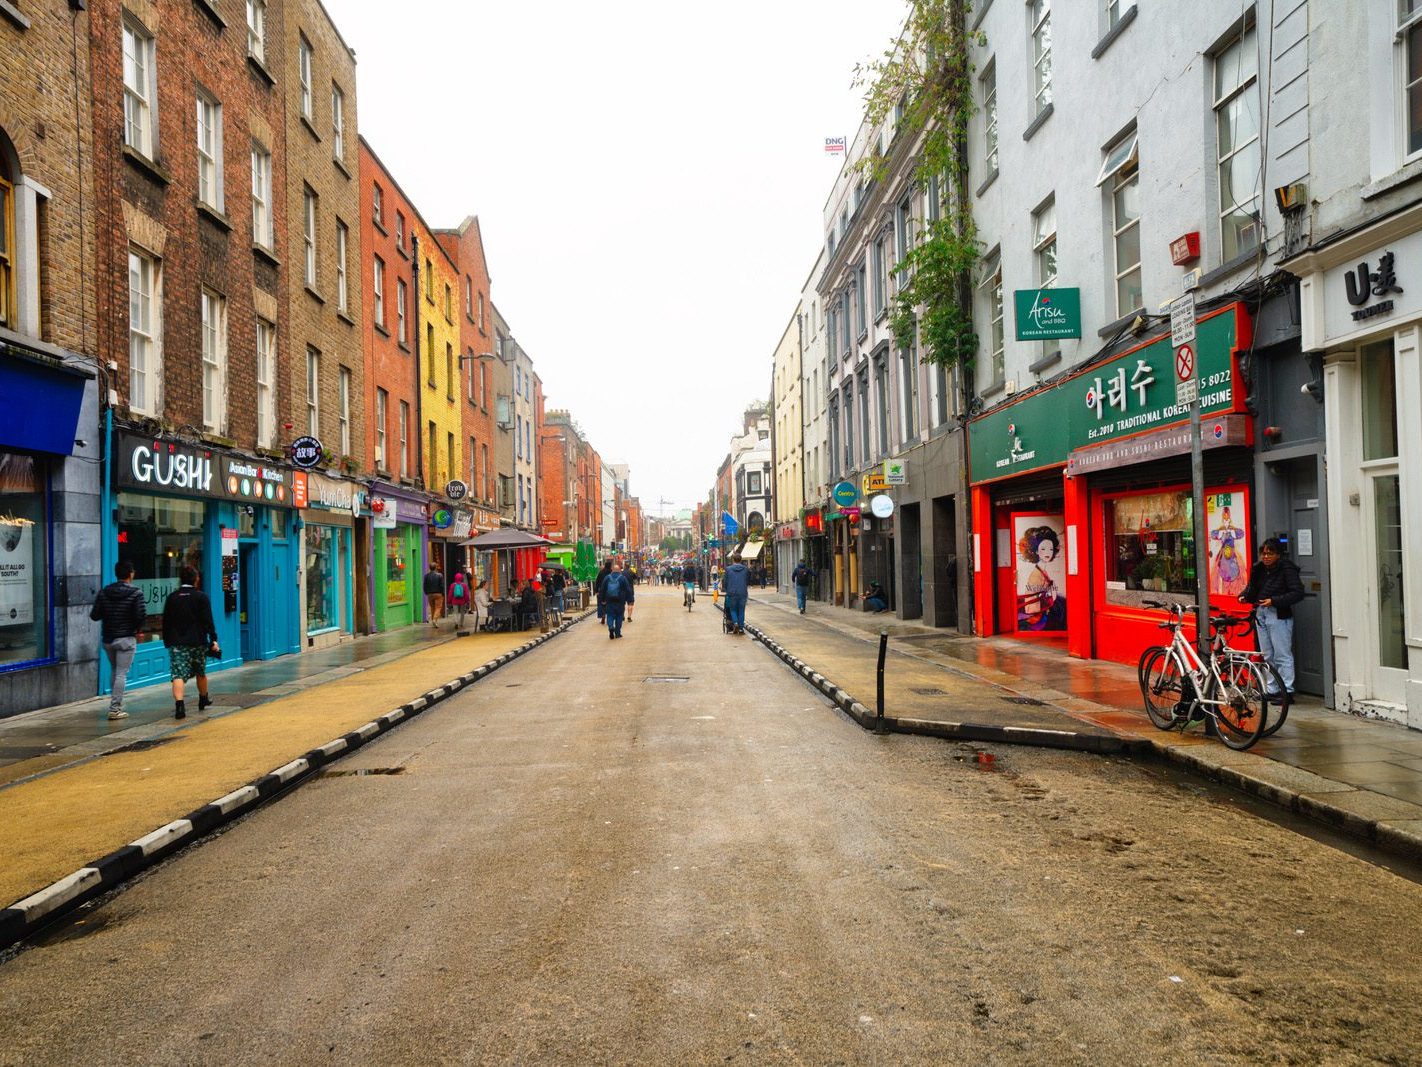 CAPEL STREET ON A DULL WET DAY [INTERIM CAPEL STREET IMPROVEMENT WORKS ARE NOW ONGOING] 014